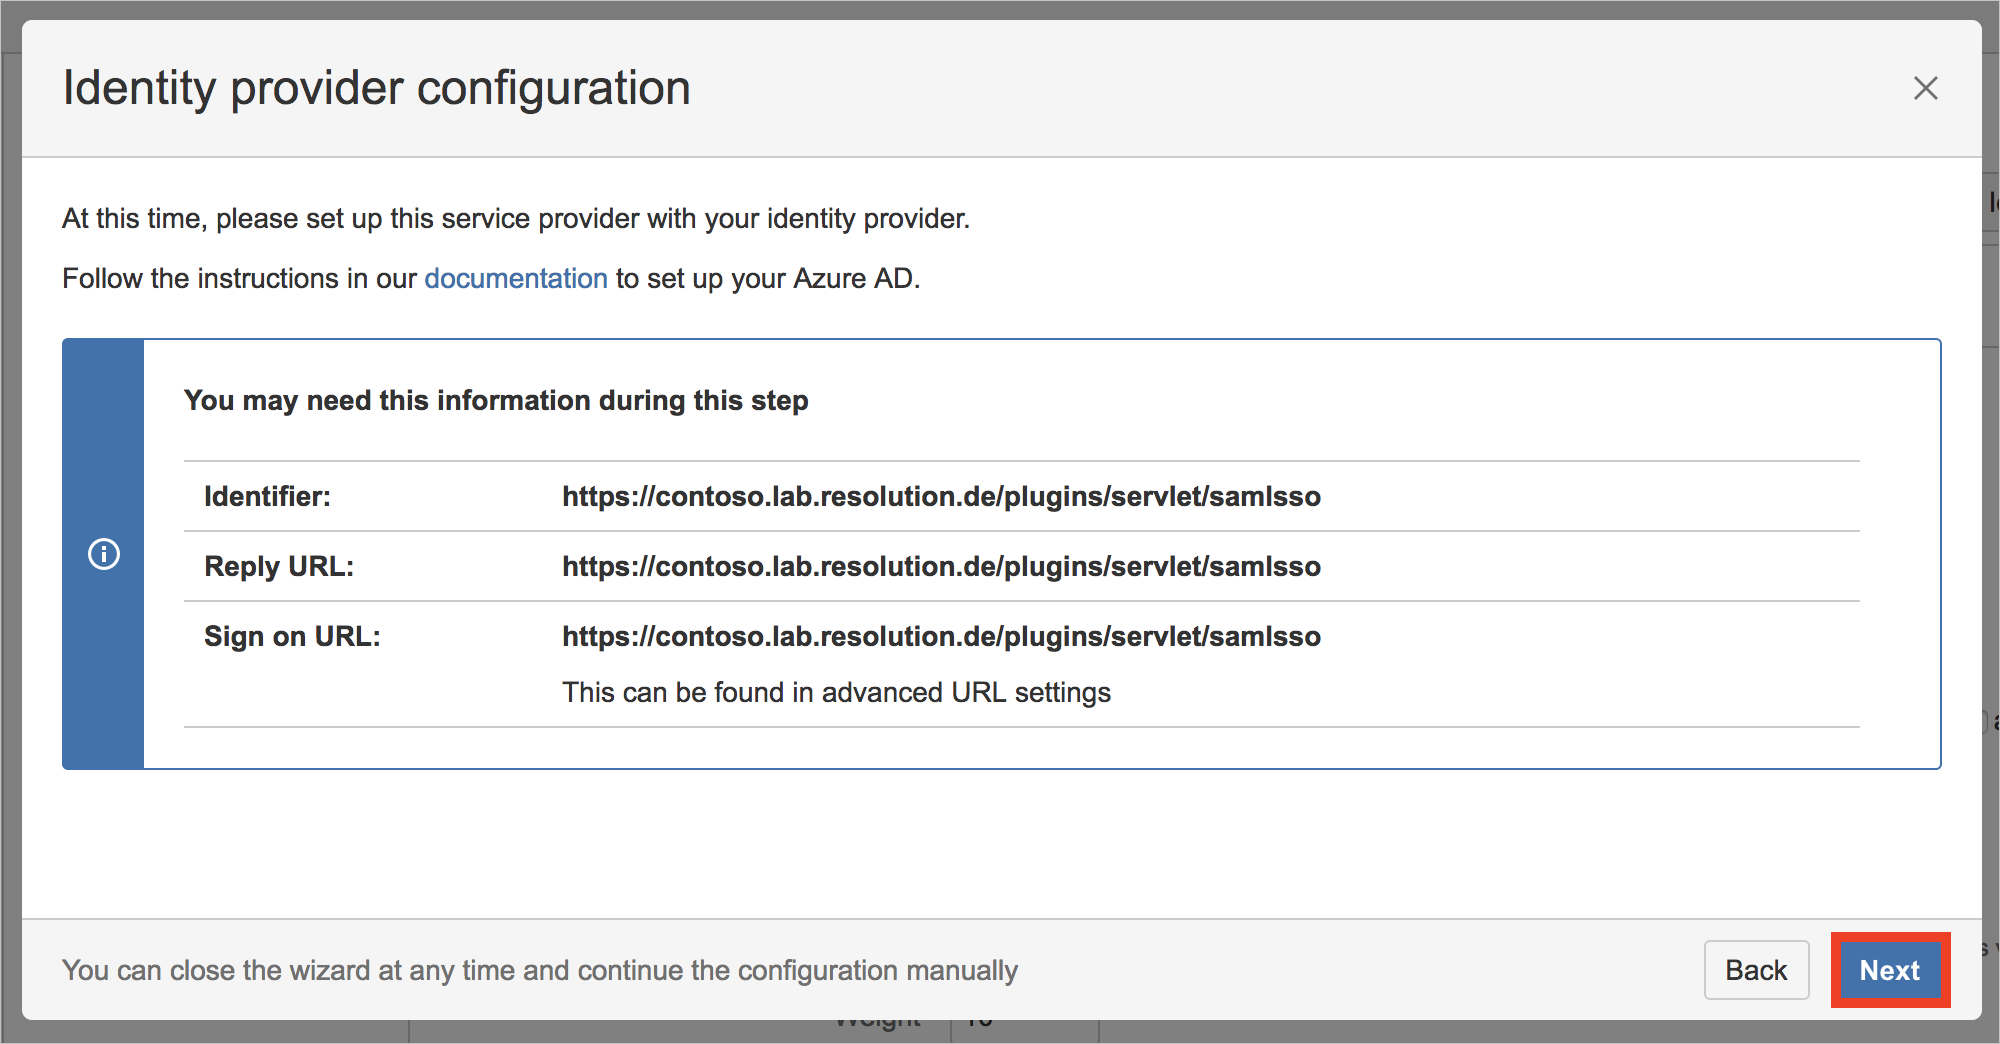 Screenshot that shows the "Identity provider configuration" page with the "Next" button selected.